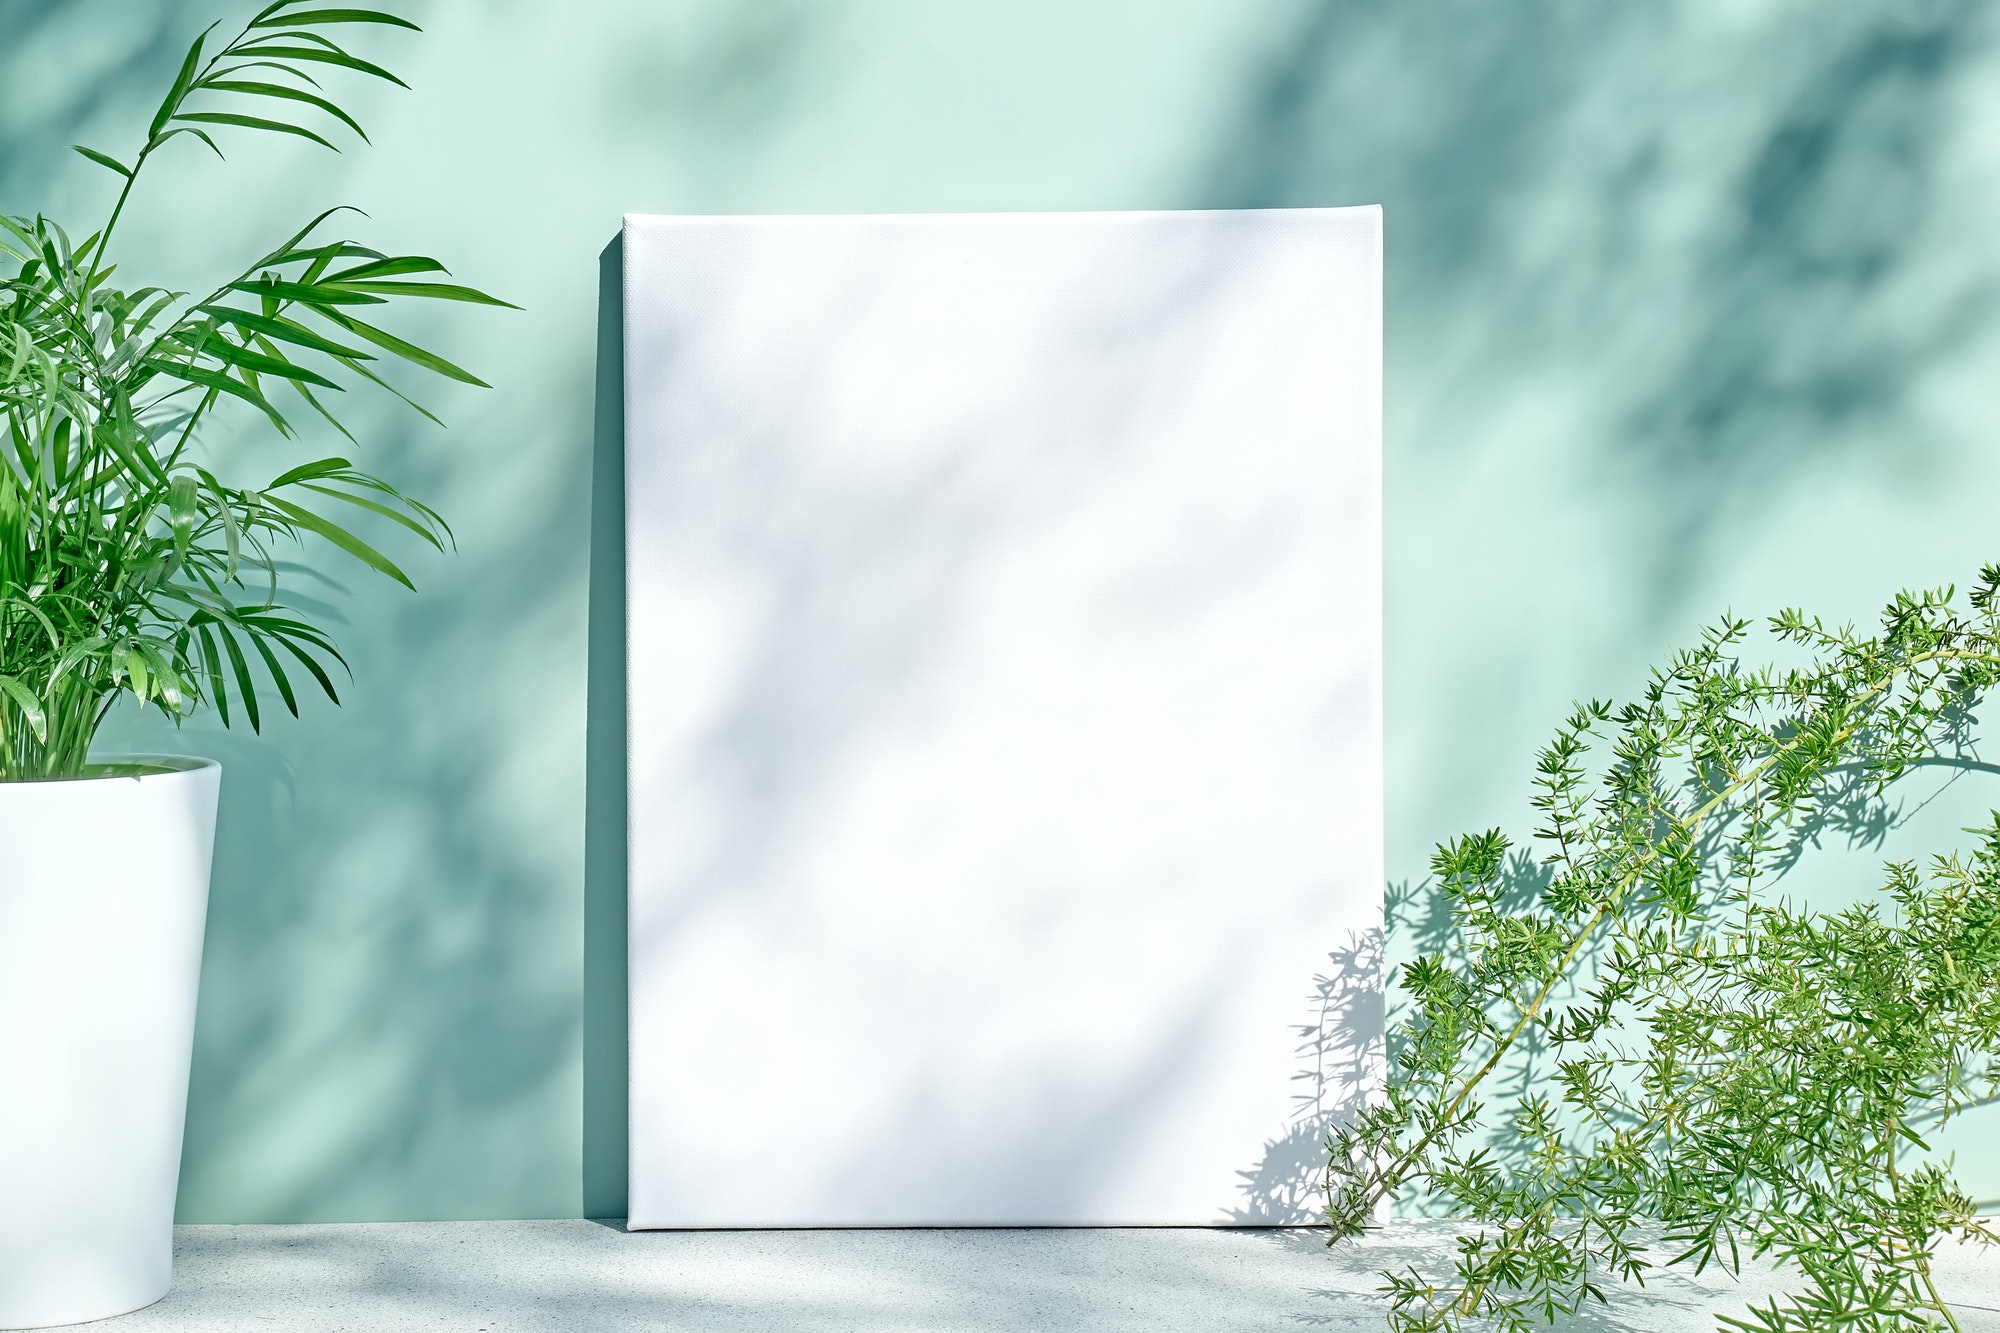 Blank white drawing canvas on mint colored surface with palm, home plants and soft floral shadows.